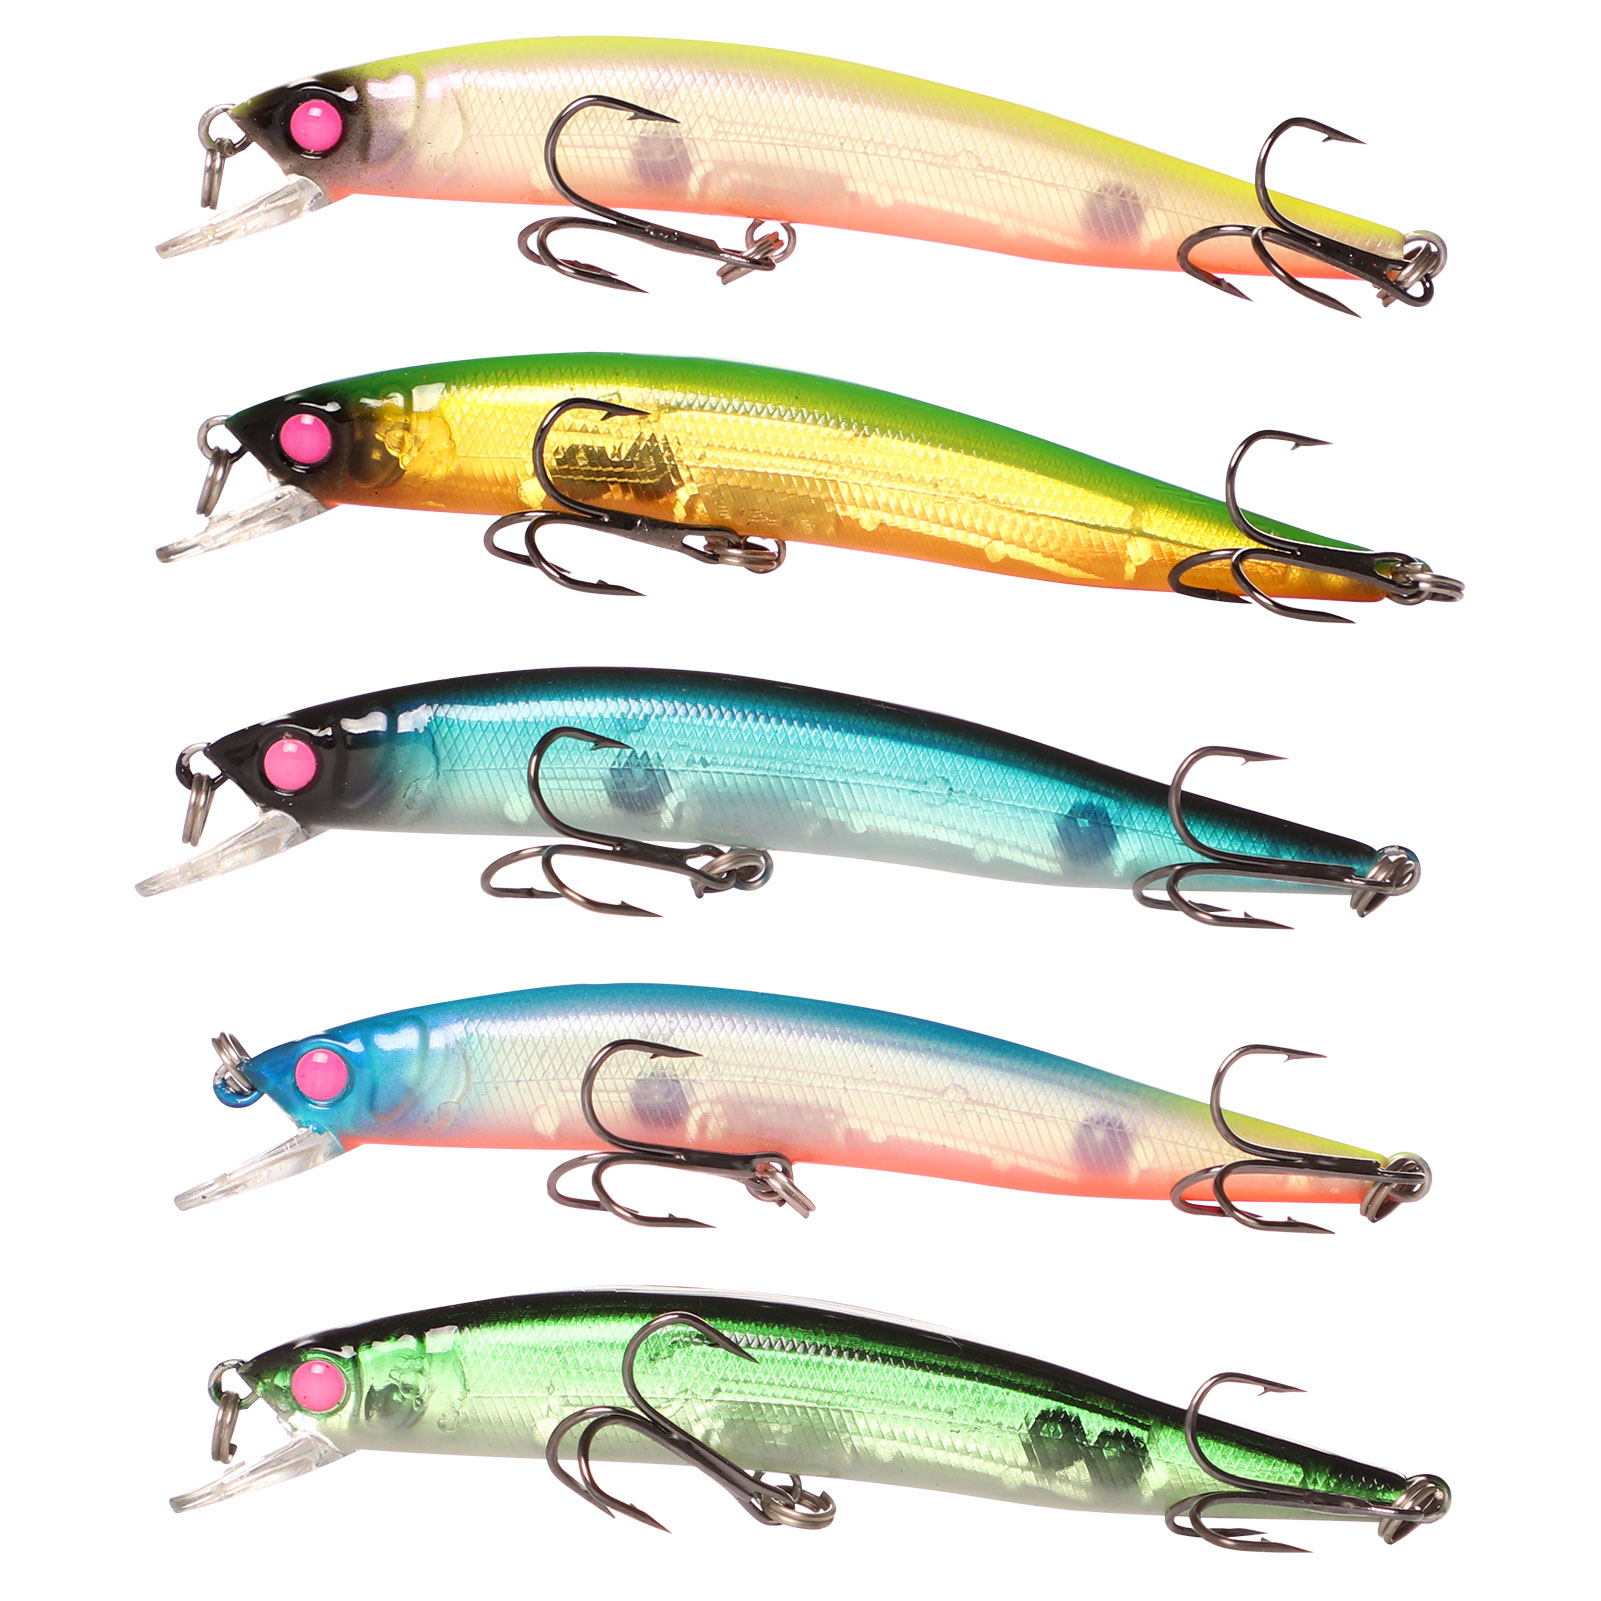 FREE FISHER 10PCS Hard Fishing Lures 10cm 9g Lures Wobbler Minnow Colorful Artifical Hard Baits Peche Ocean Rock Fshing Tackle Accessories